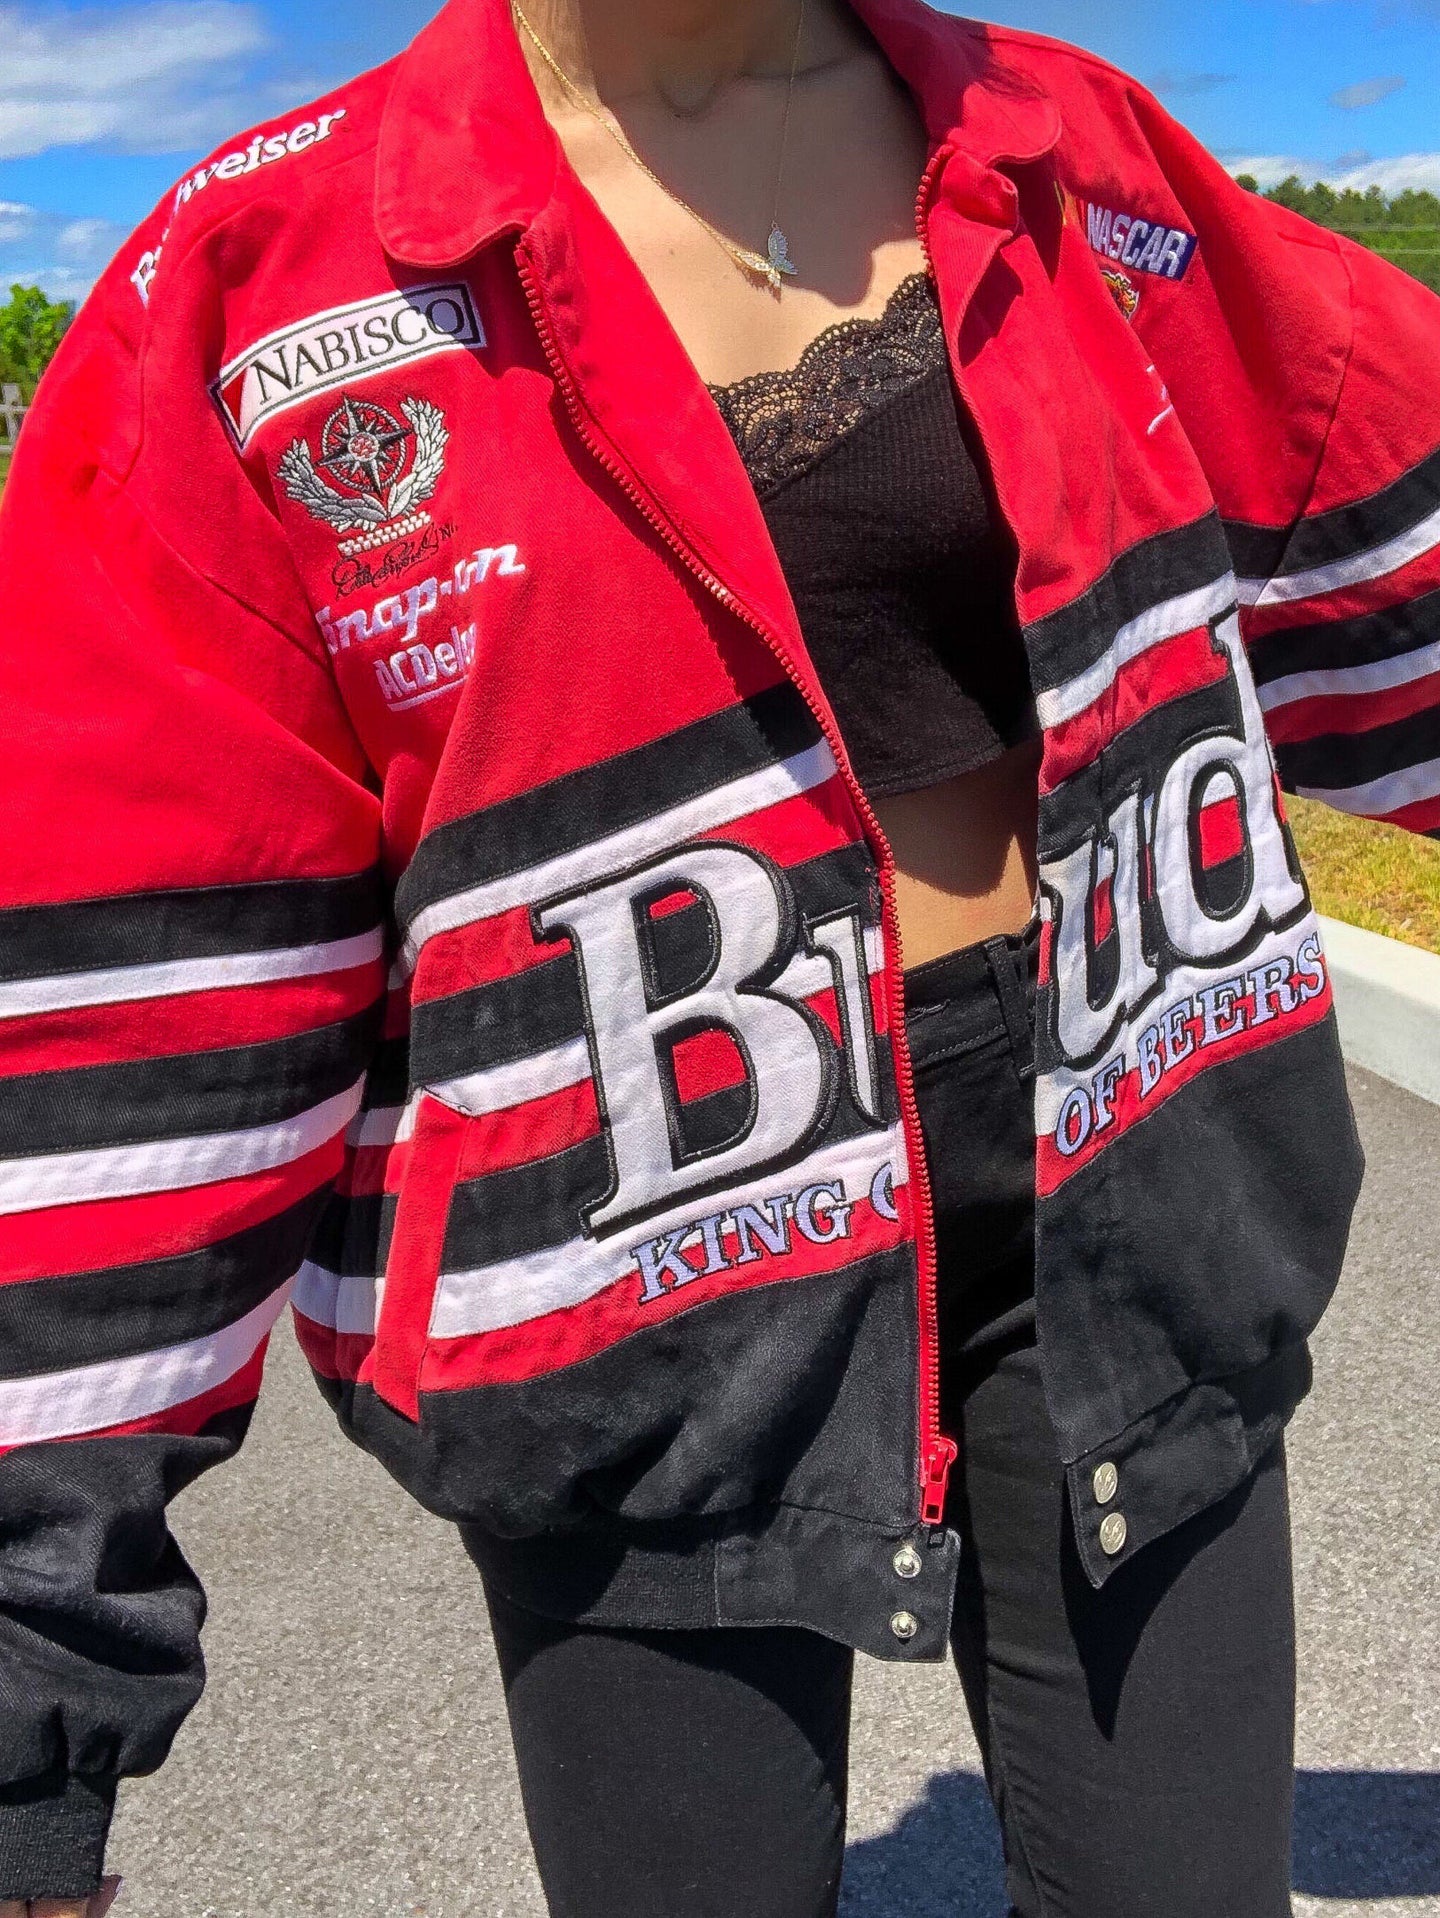 red and white striped nascar budweiser jacket oversized black jeans outfit lace tank top girl women's clothing fashion